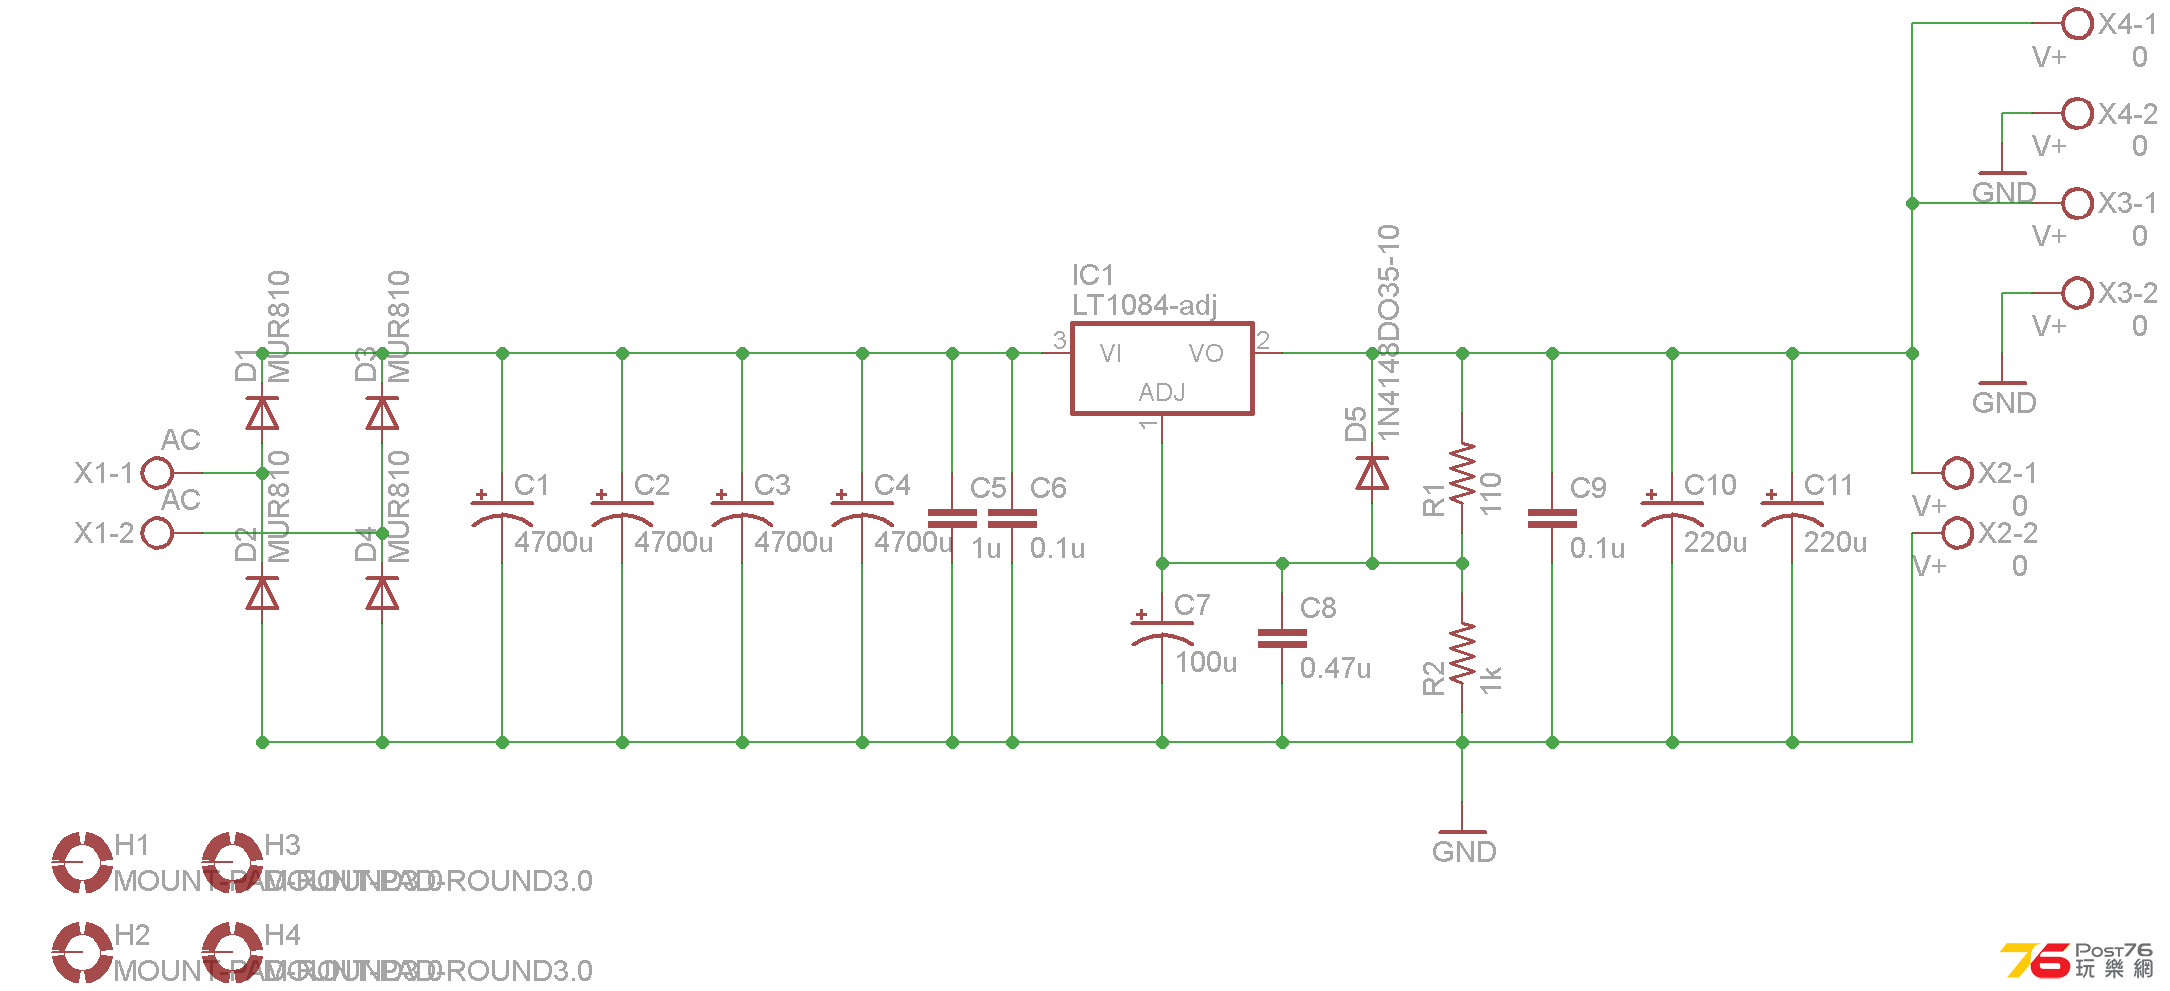 LT1083-small-schematic-modified.png